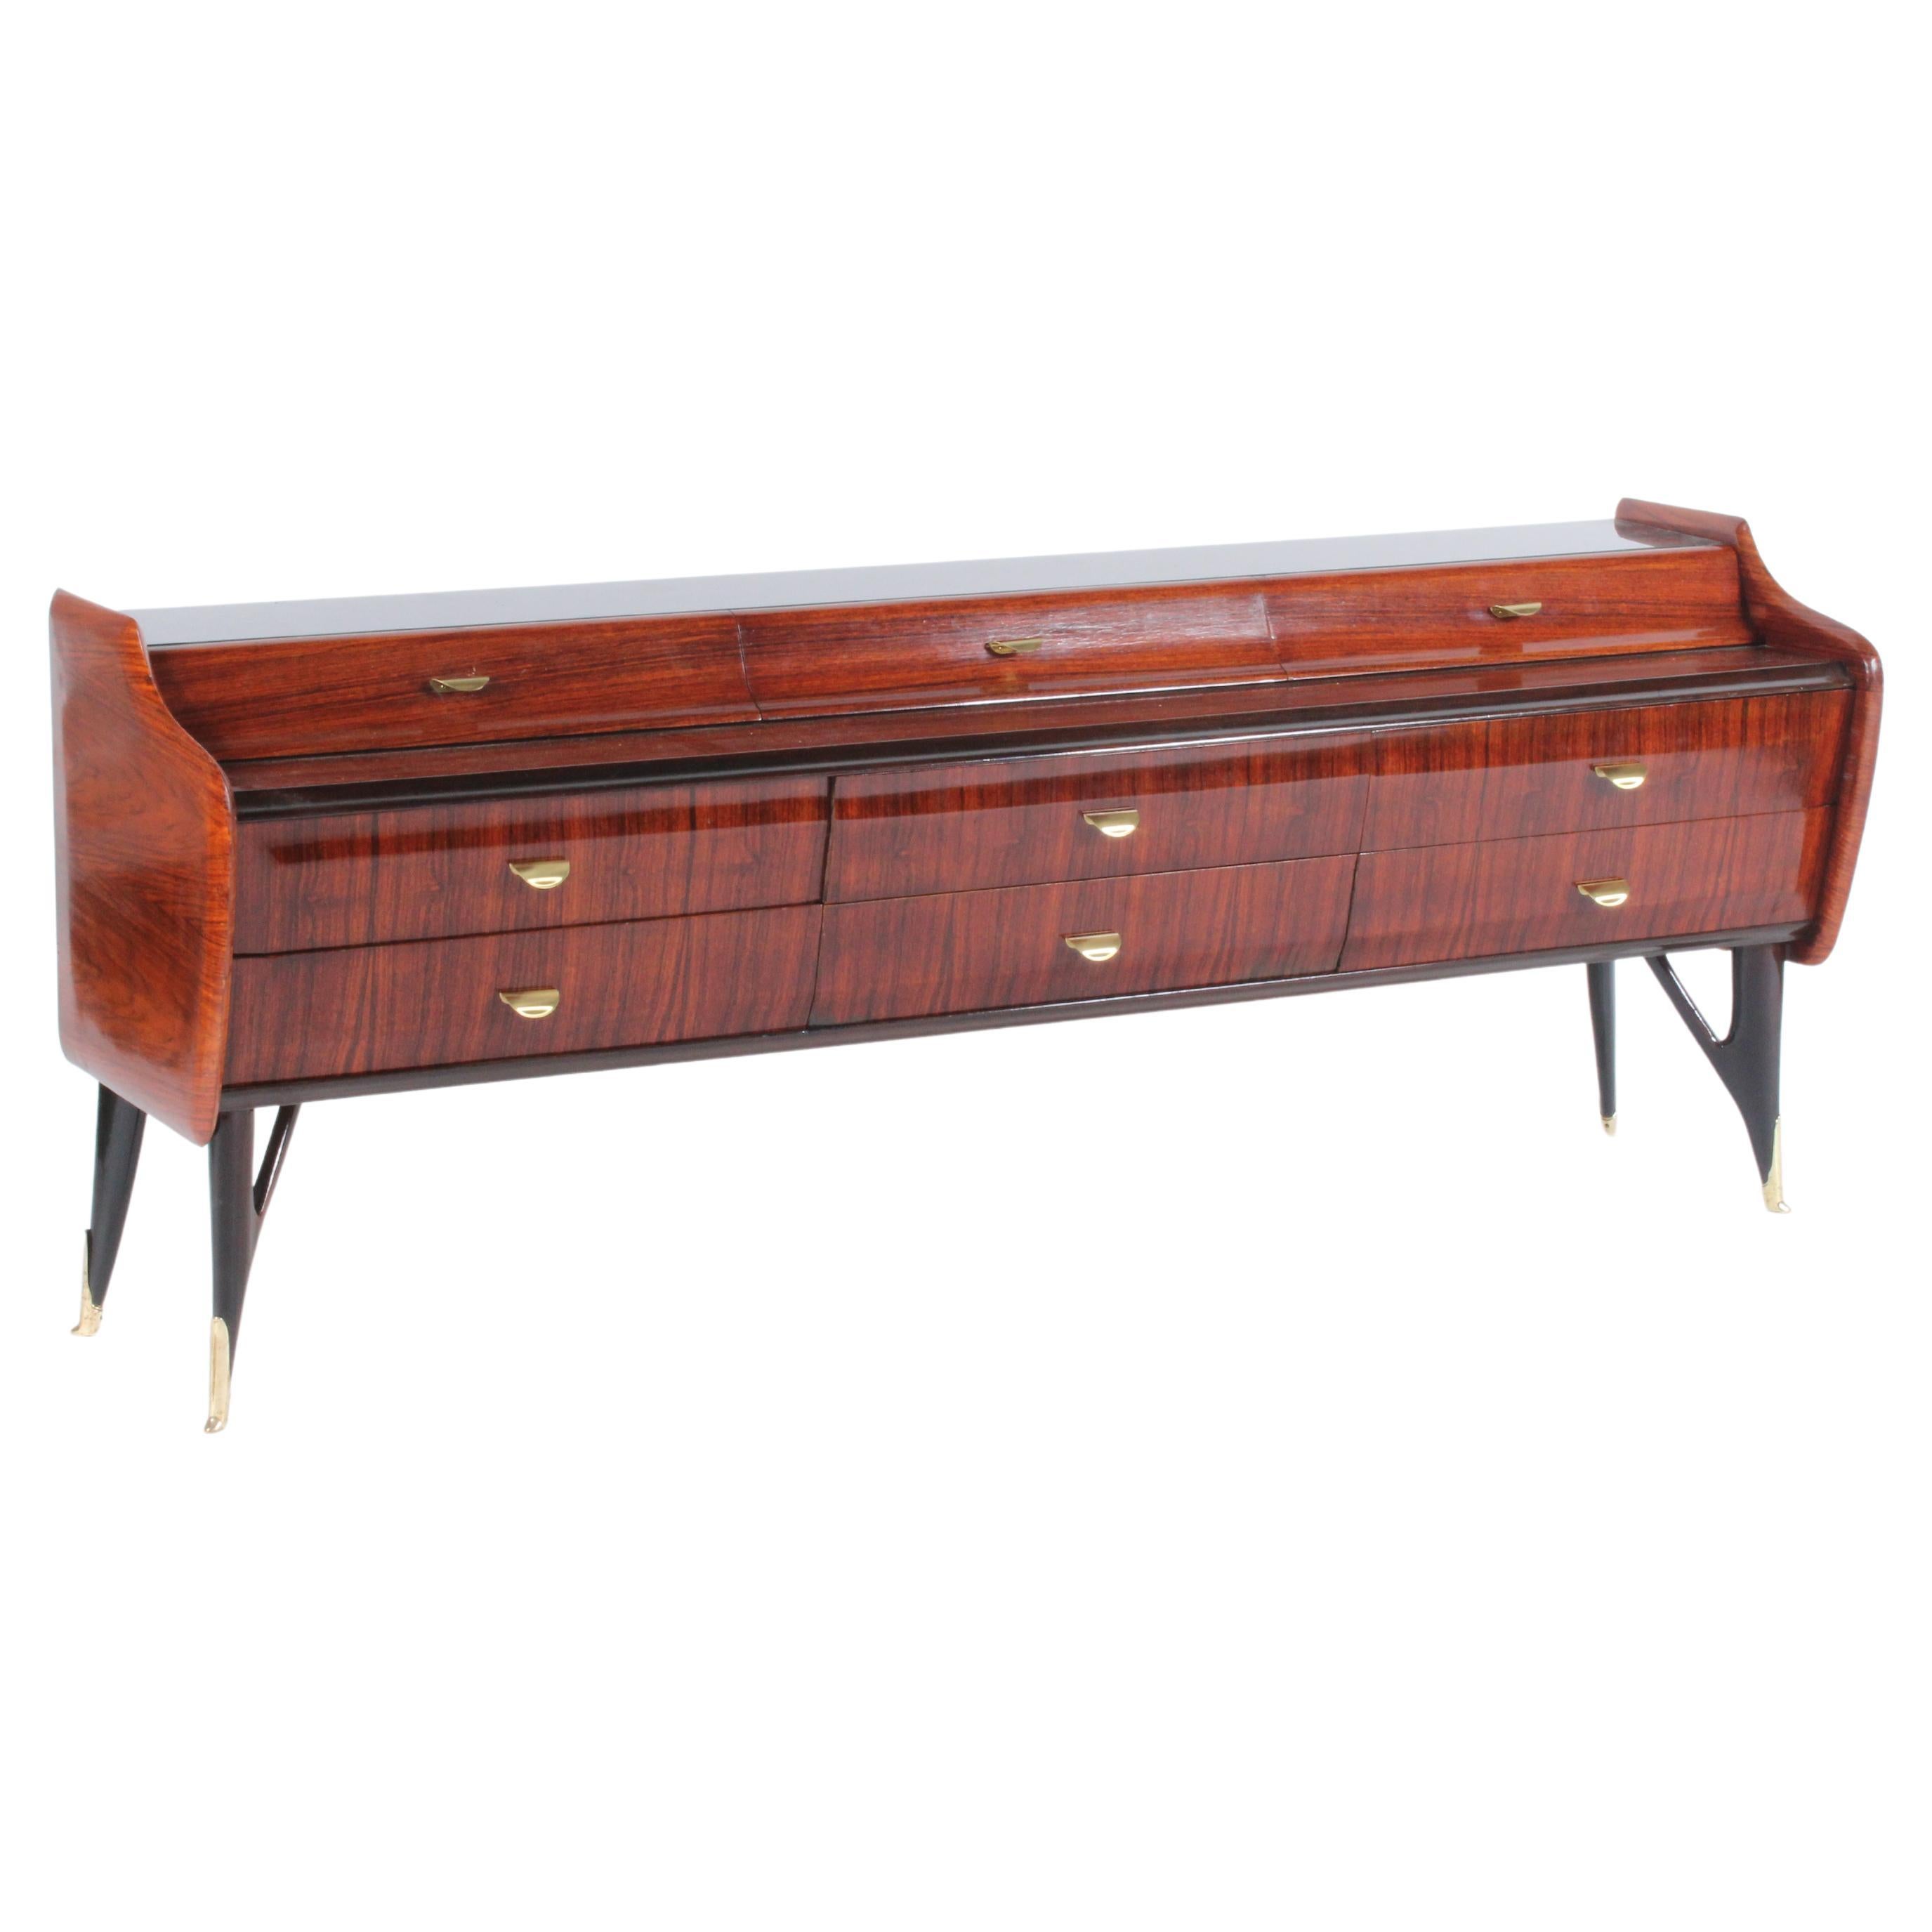 Super Stylish Midcentury Italian Sideboard in the Manner of Ico Parisi For Sale